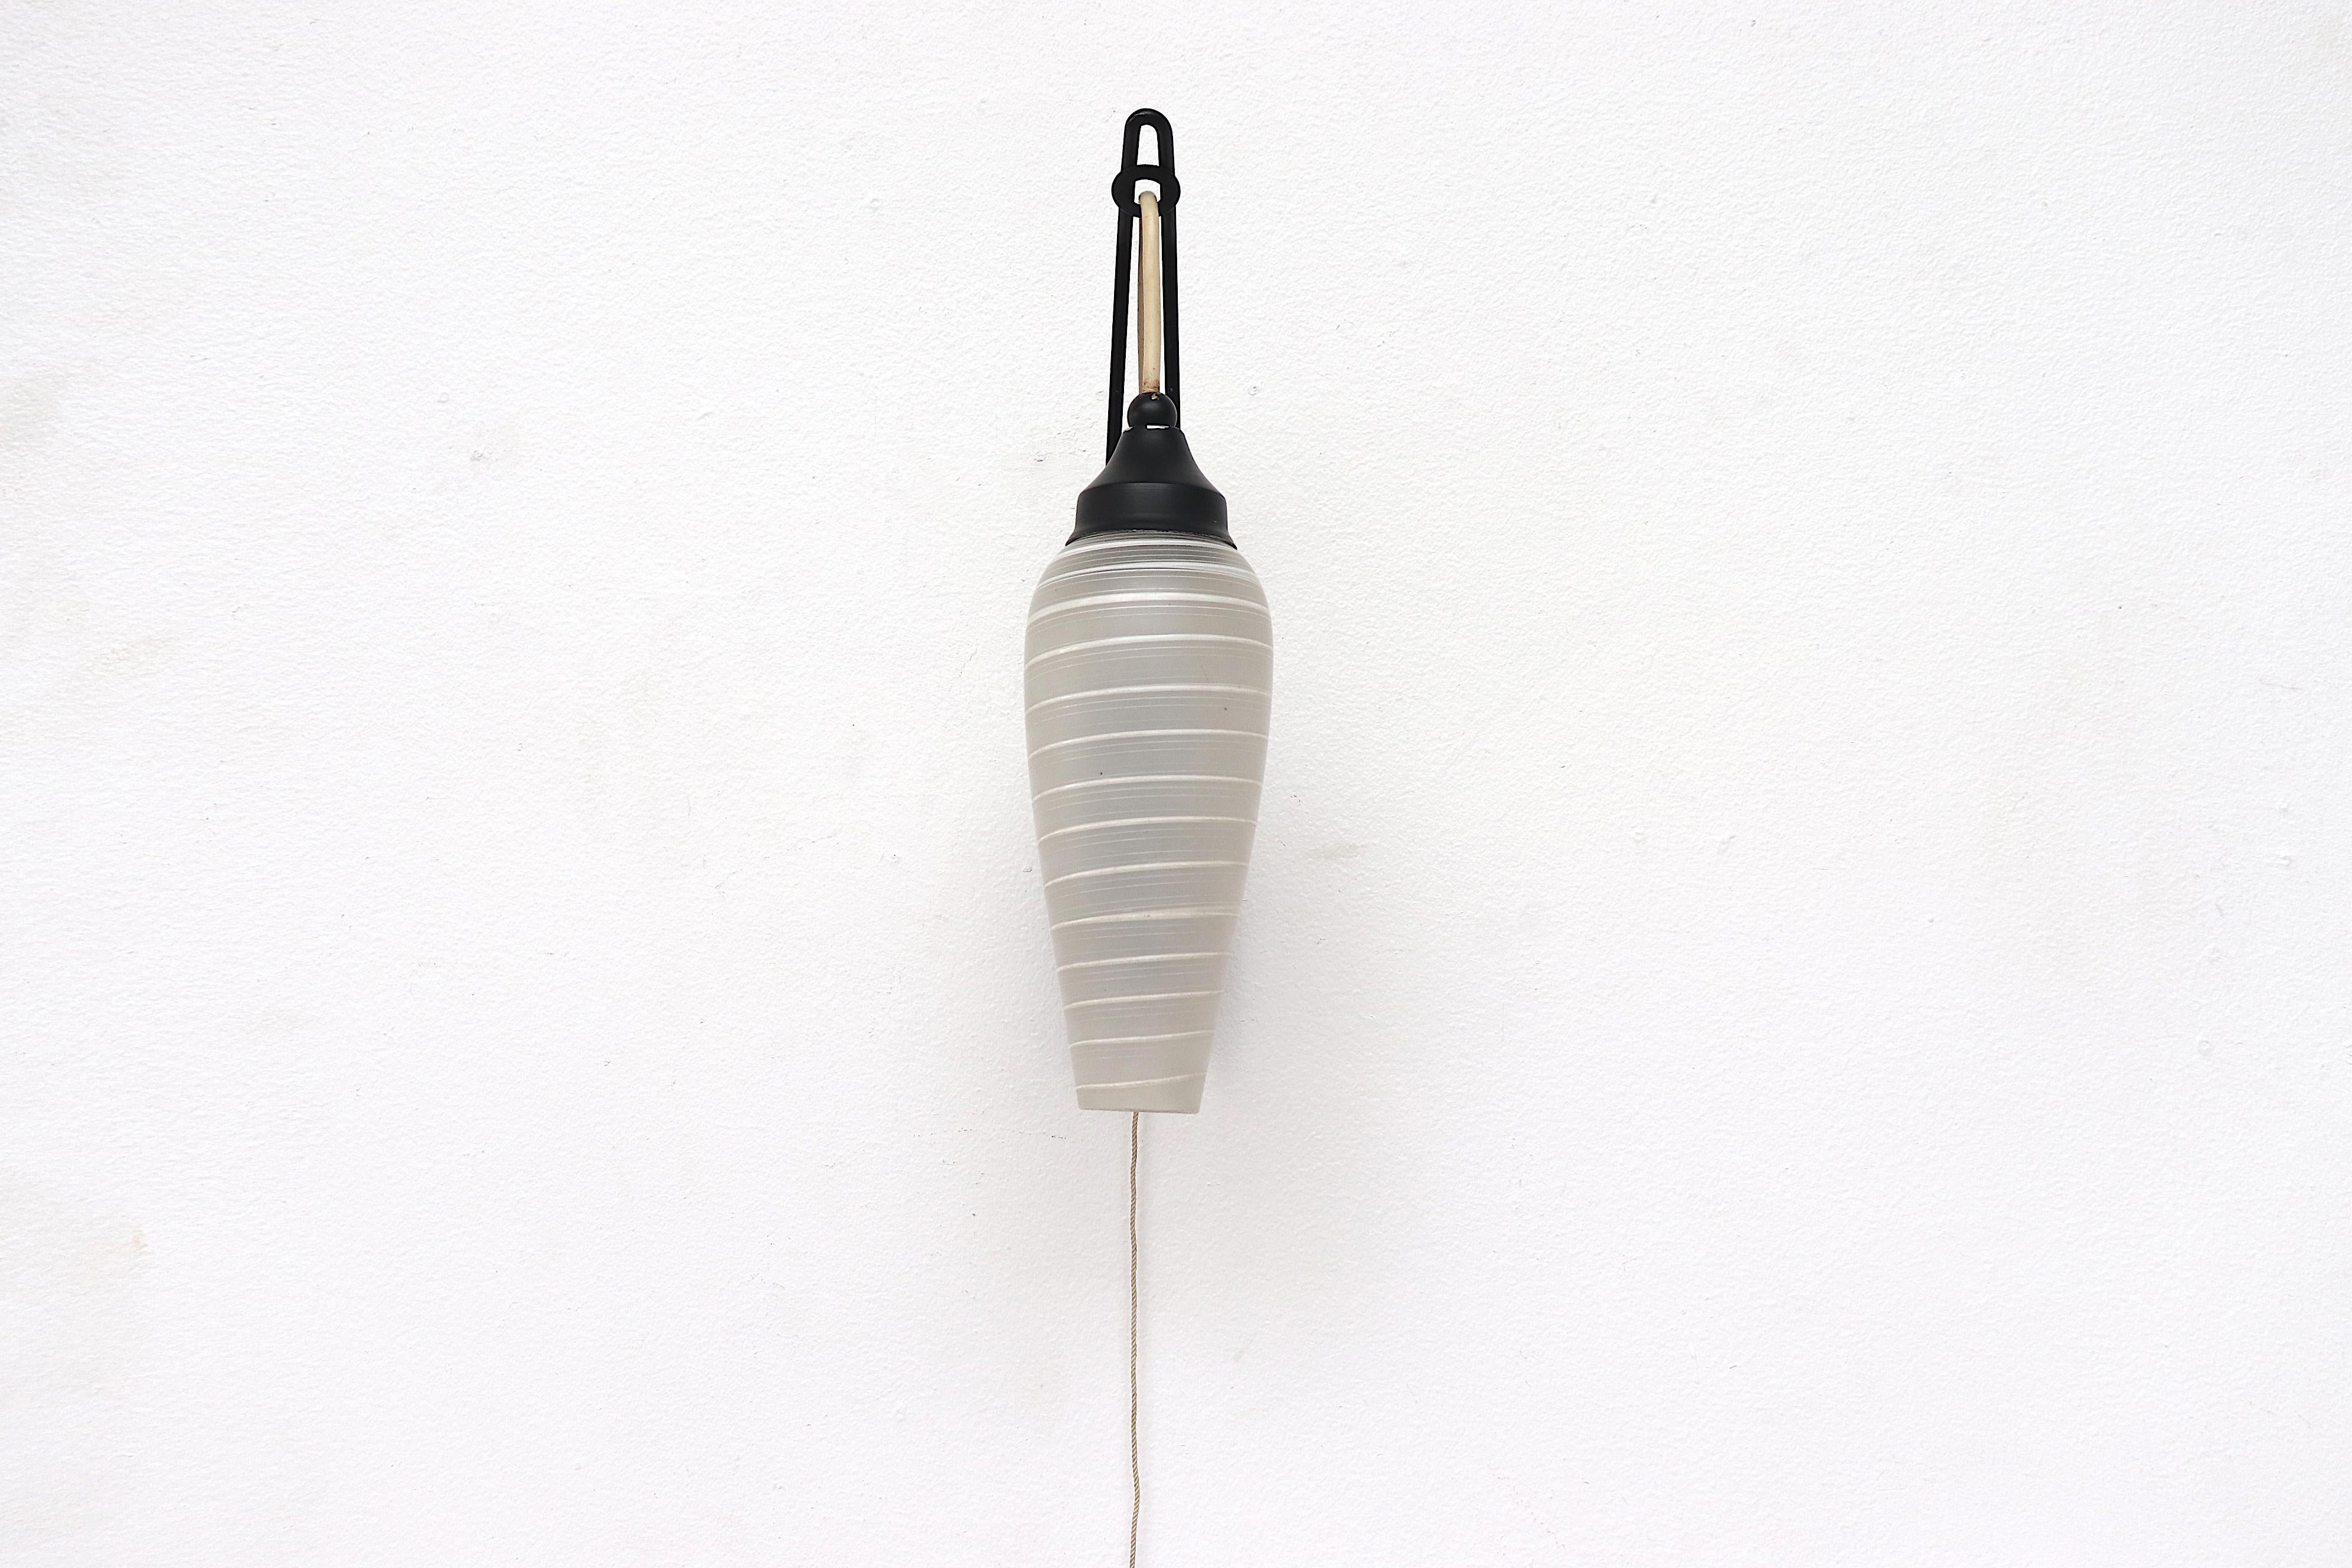 Midcentury Dutch hanging wall sconce with striped milk glass shade and black enameled base. Fishing pole style lamp in good original condition.